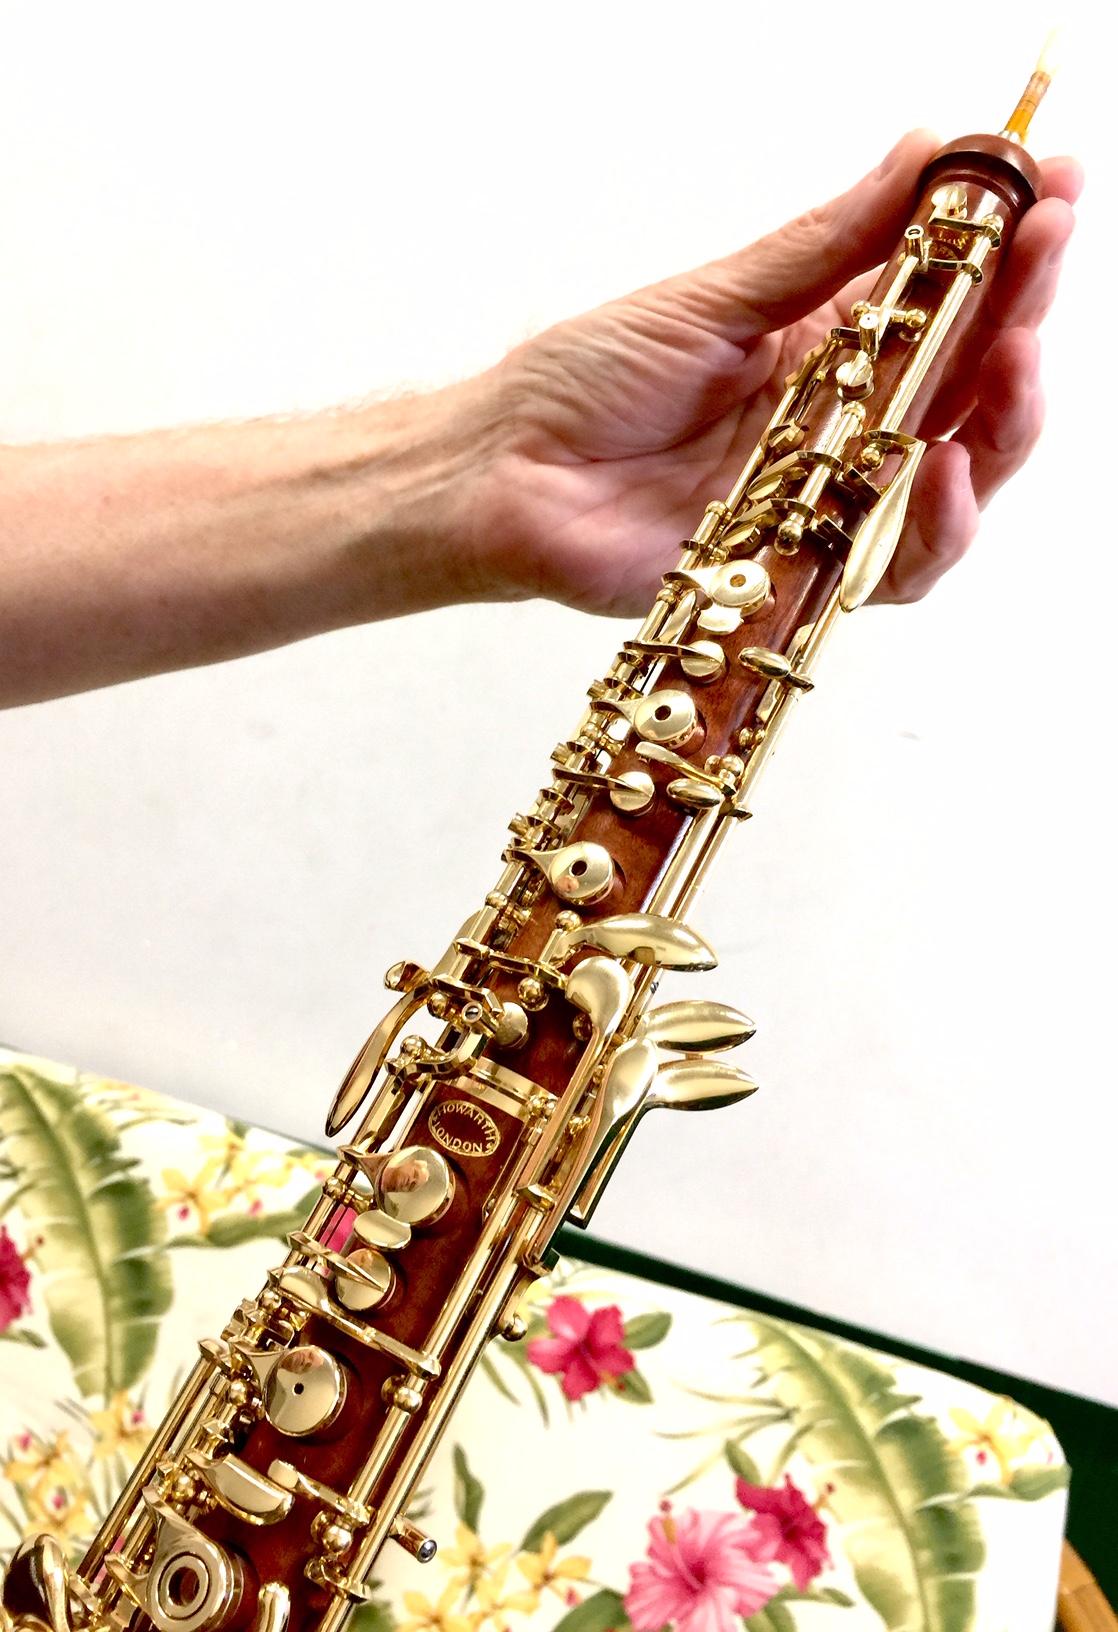 Legacy Oboe: From Koke'e to the Concert Stage | Hawaii Public Radio